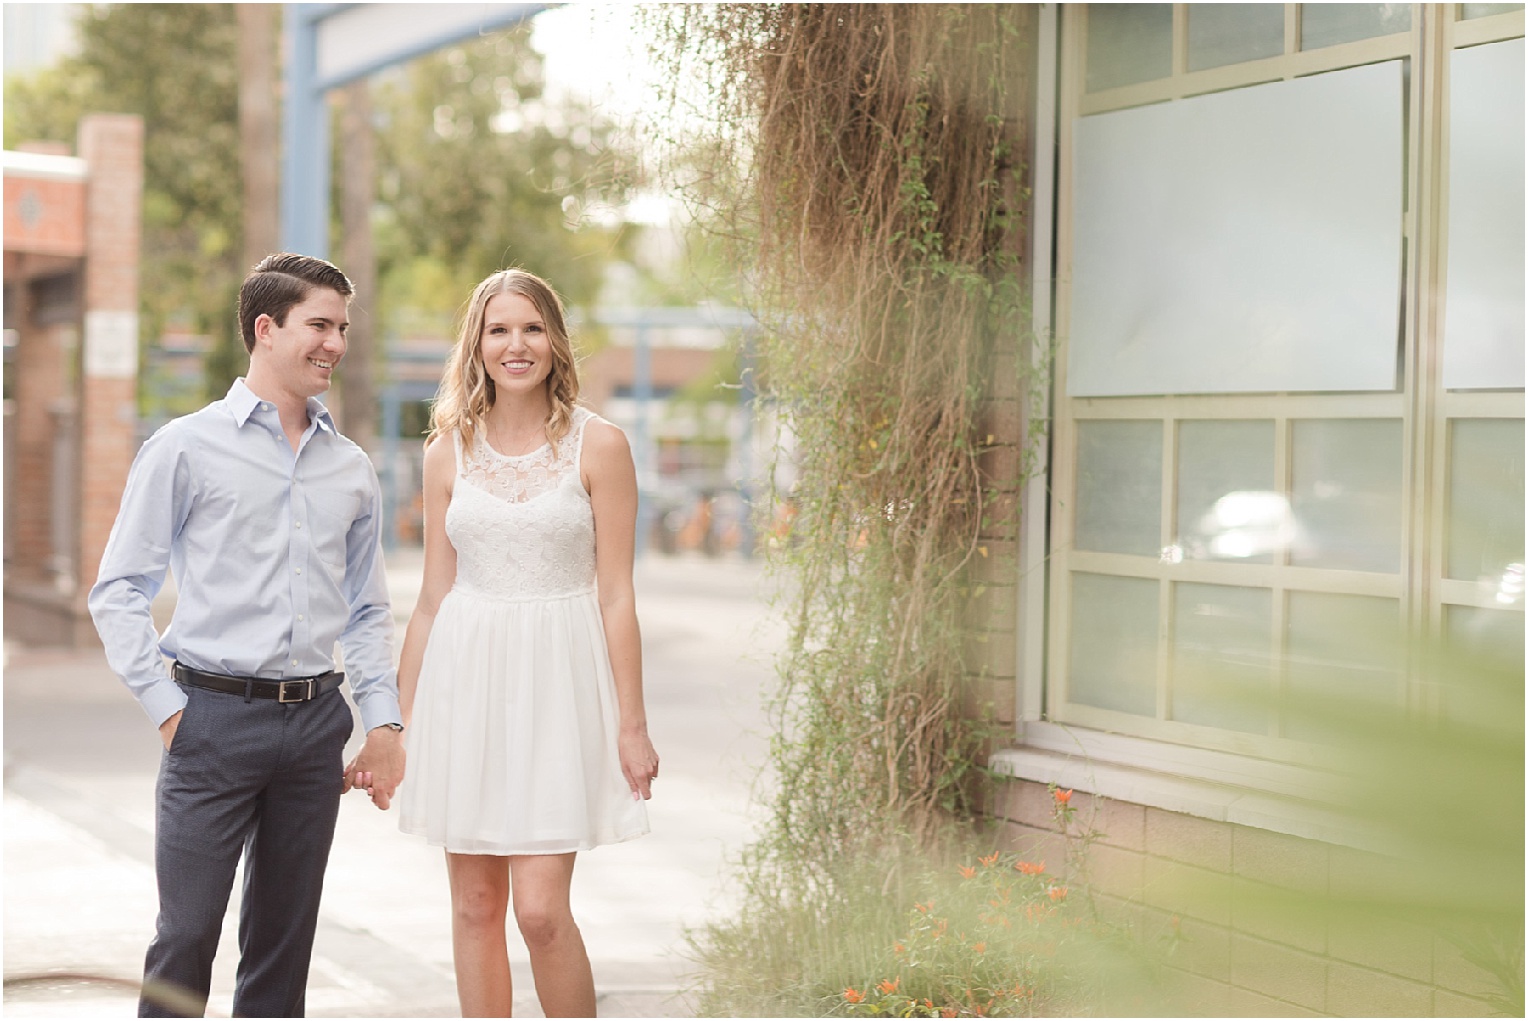 Engagement Pictures in Tucson Arizona Tucson Photographer Christa + Robby sunset engagement session